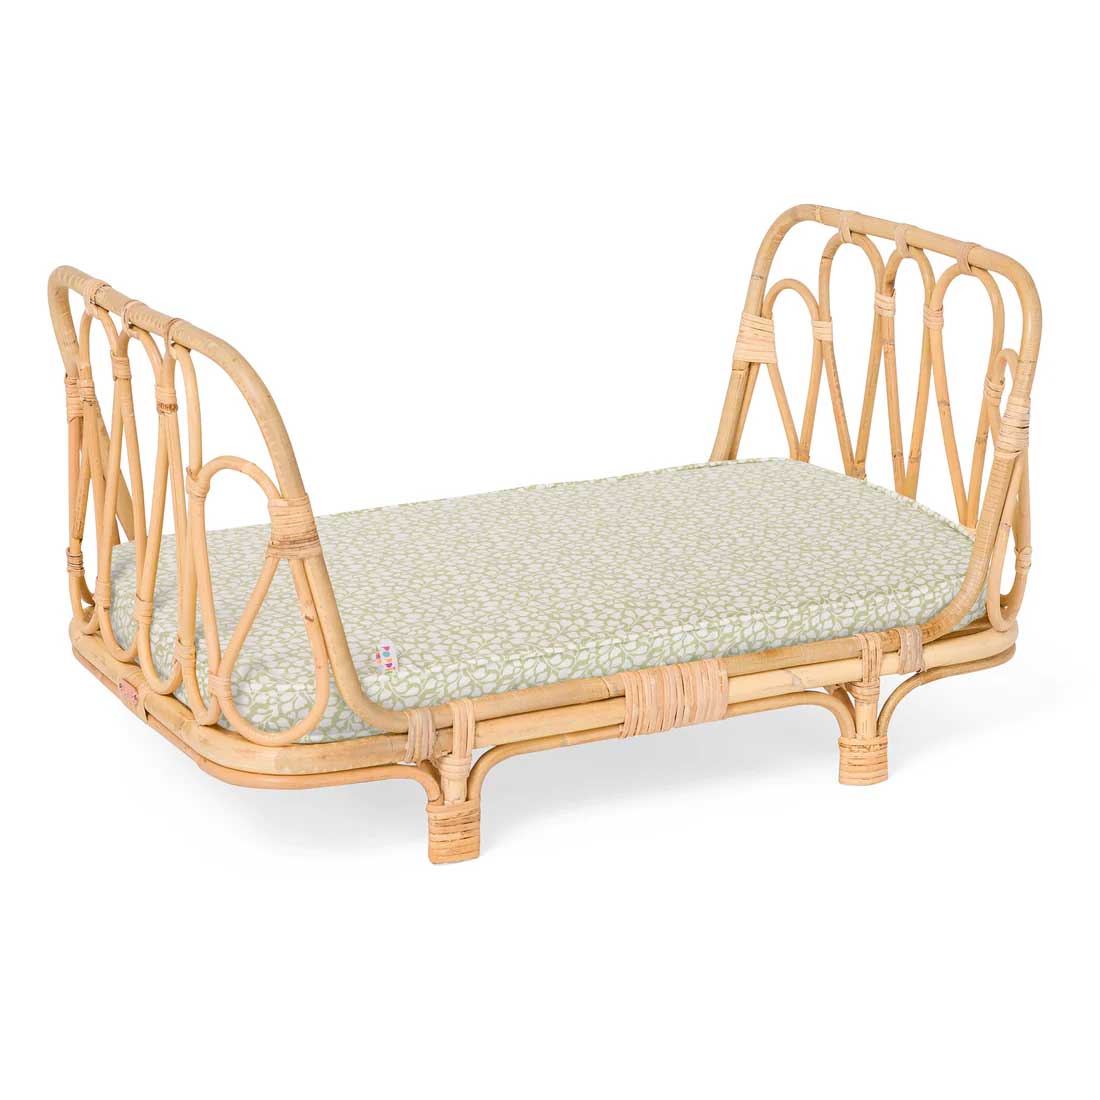 Poppie Rattan Doll Day Bed - Olive Leaves